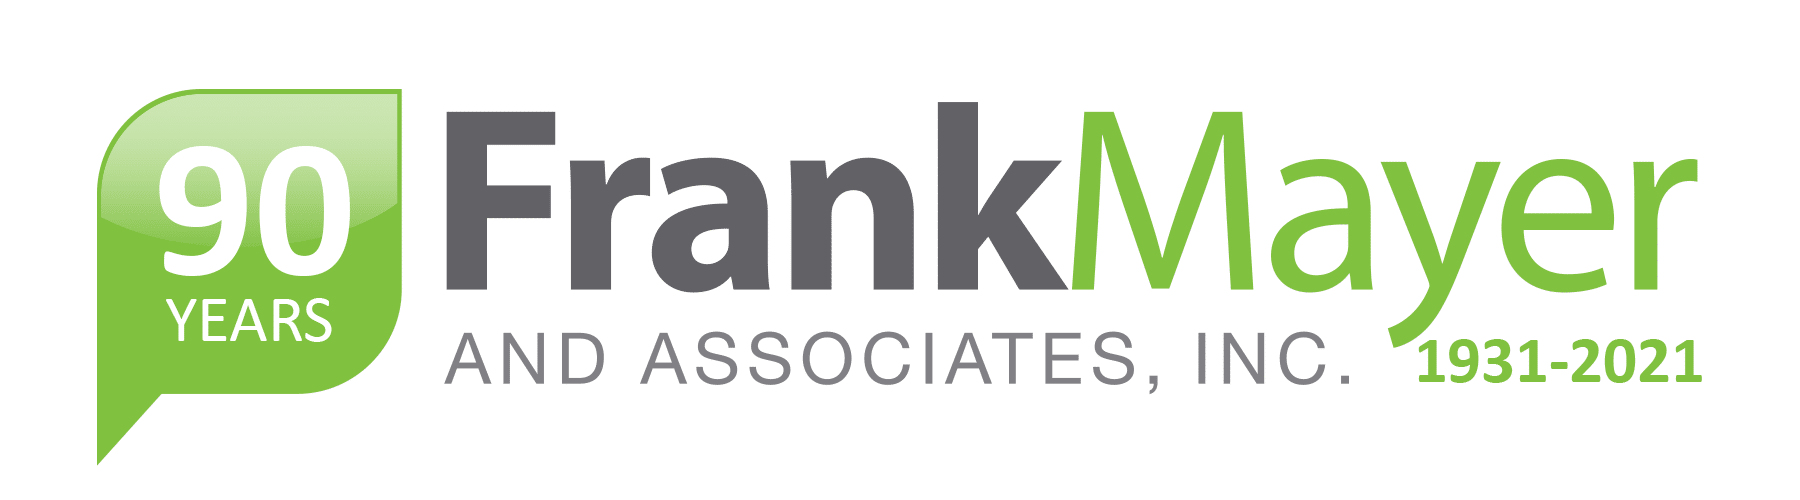 Frank Mayer and Associates Reflects on 90 Years in Business